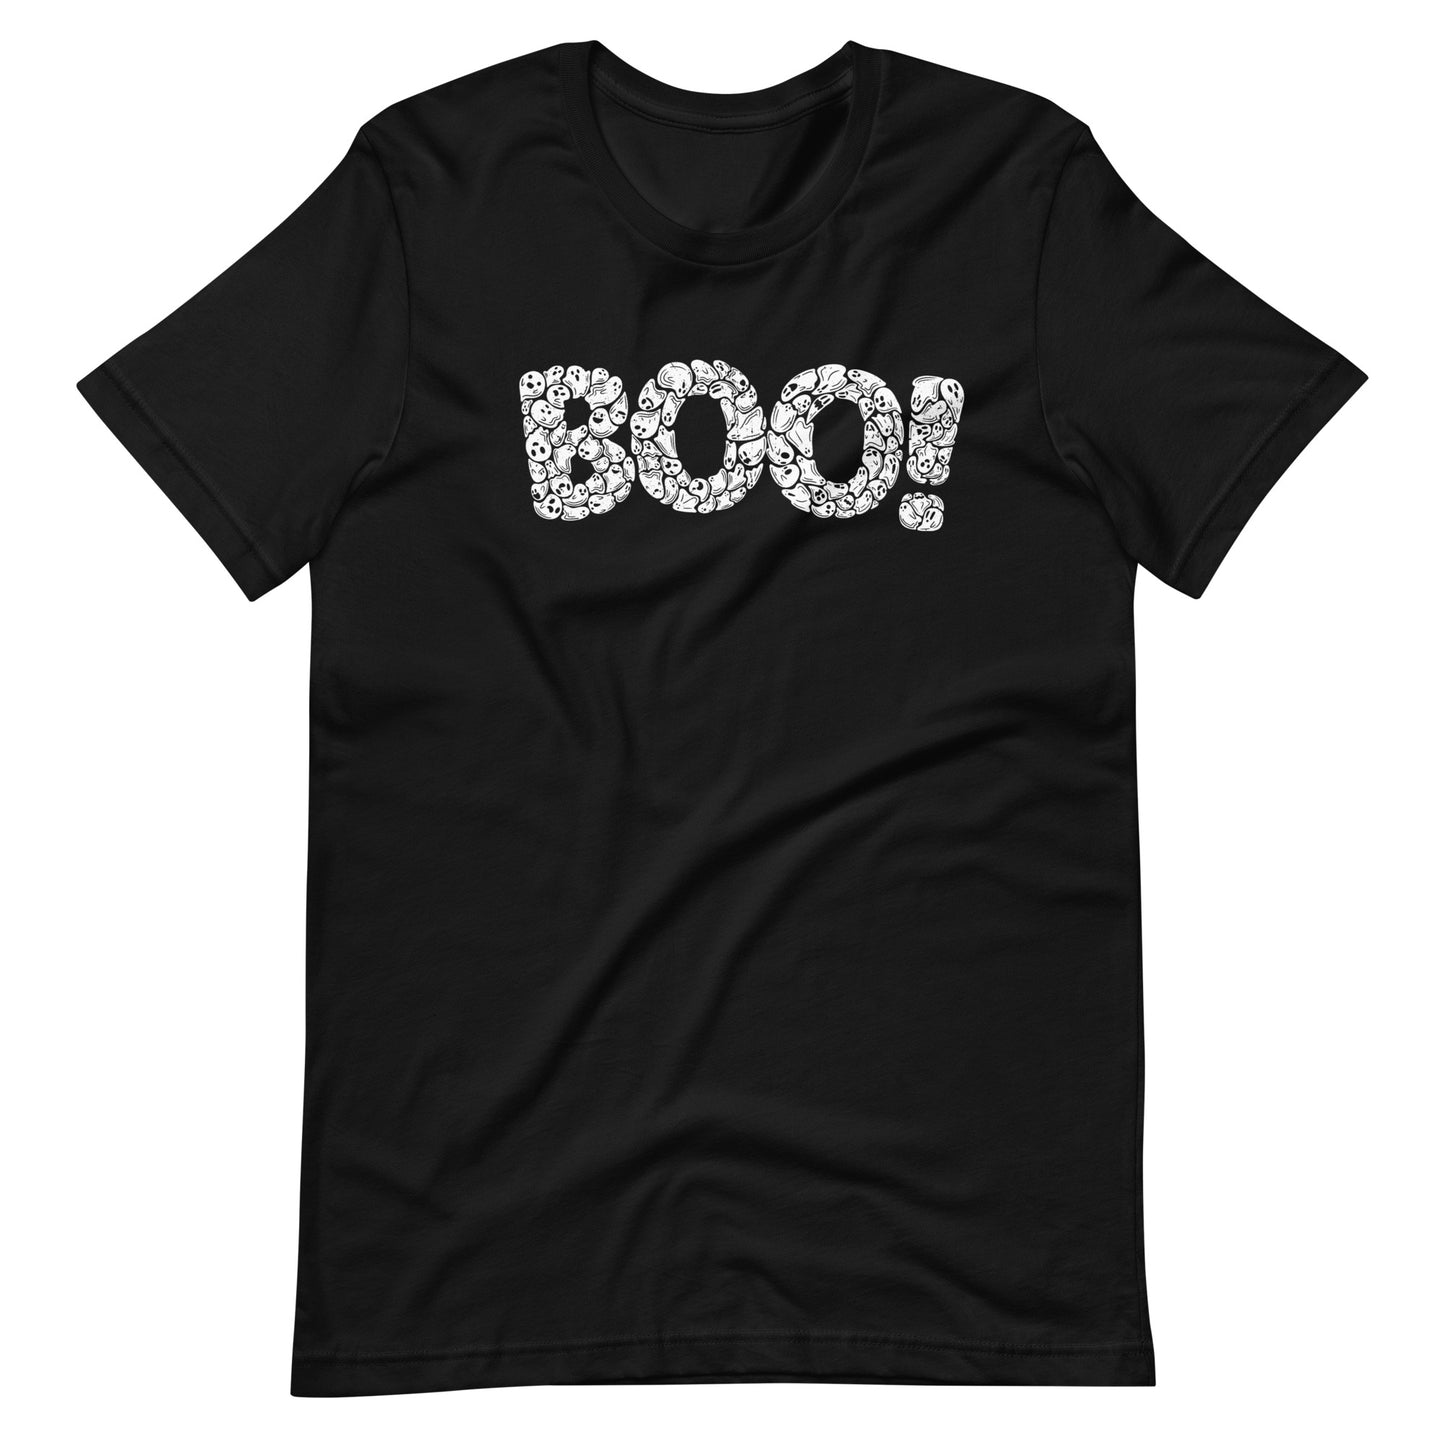 Boo! 107 Halloween Ghosts Cool Spooky T-Shirt